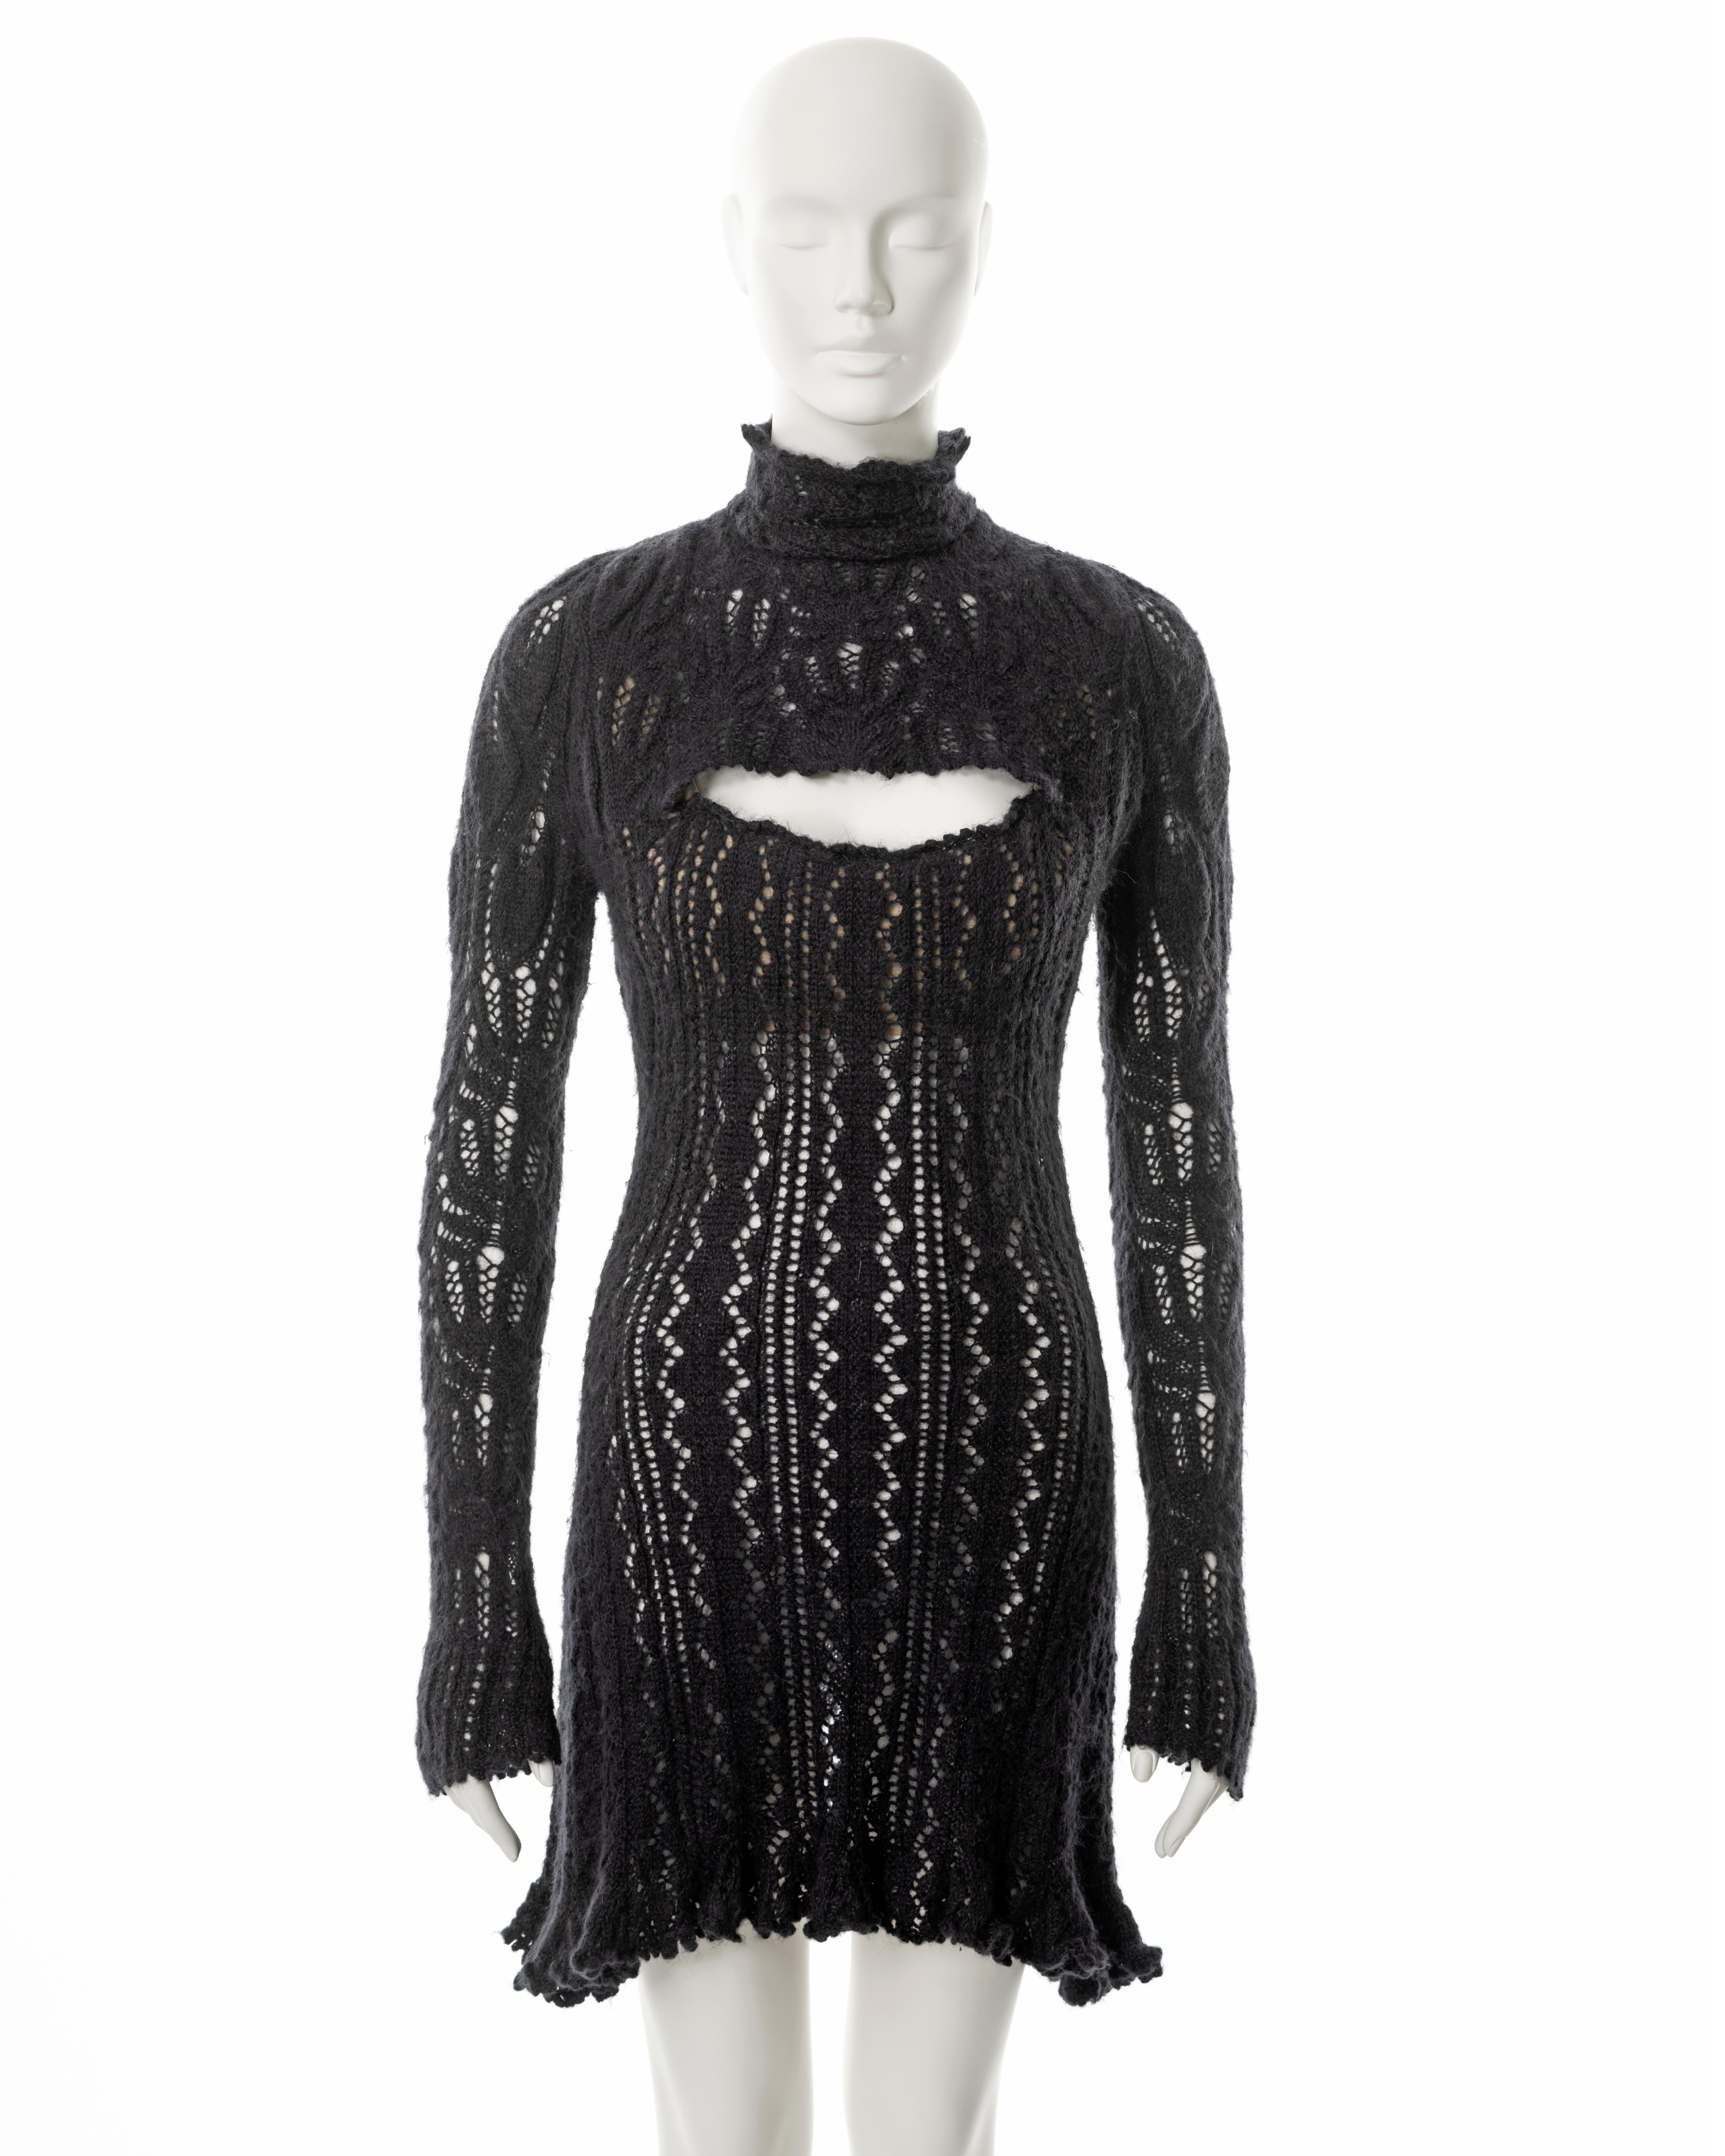 ▪ Vivienne Westwood knitted mini dress
▪ Sold by One of a Kind Archive
▪ Fall-Winter 1993
▪ Constructed from steel-grey open-knit alpaca wool with graduated leaf motifs
▪ Nude internal corset produces a pronounced décolletage, visible through the